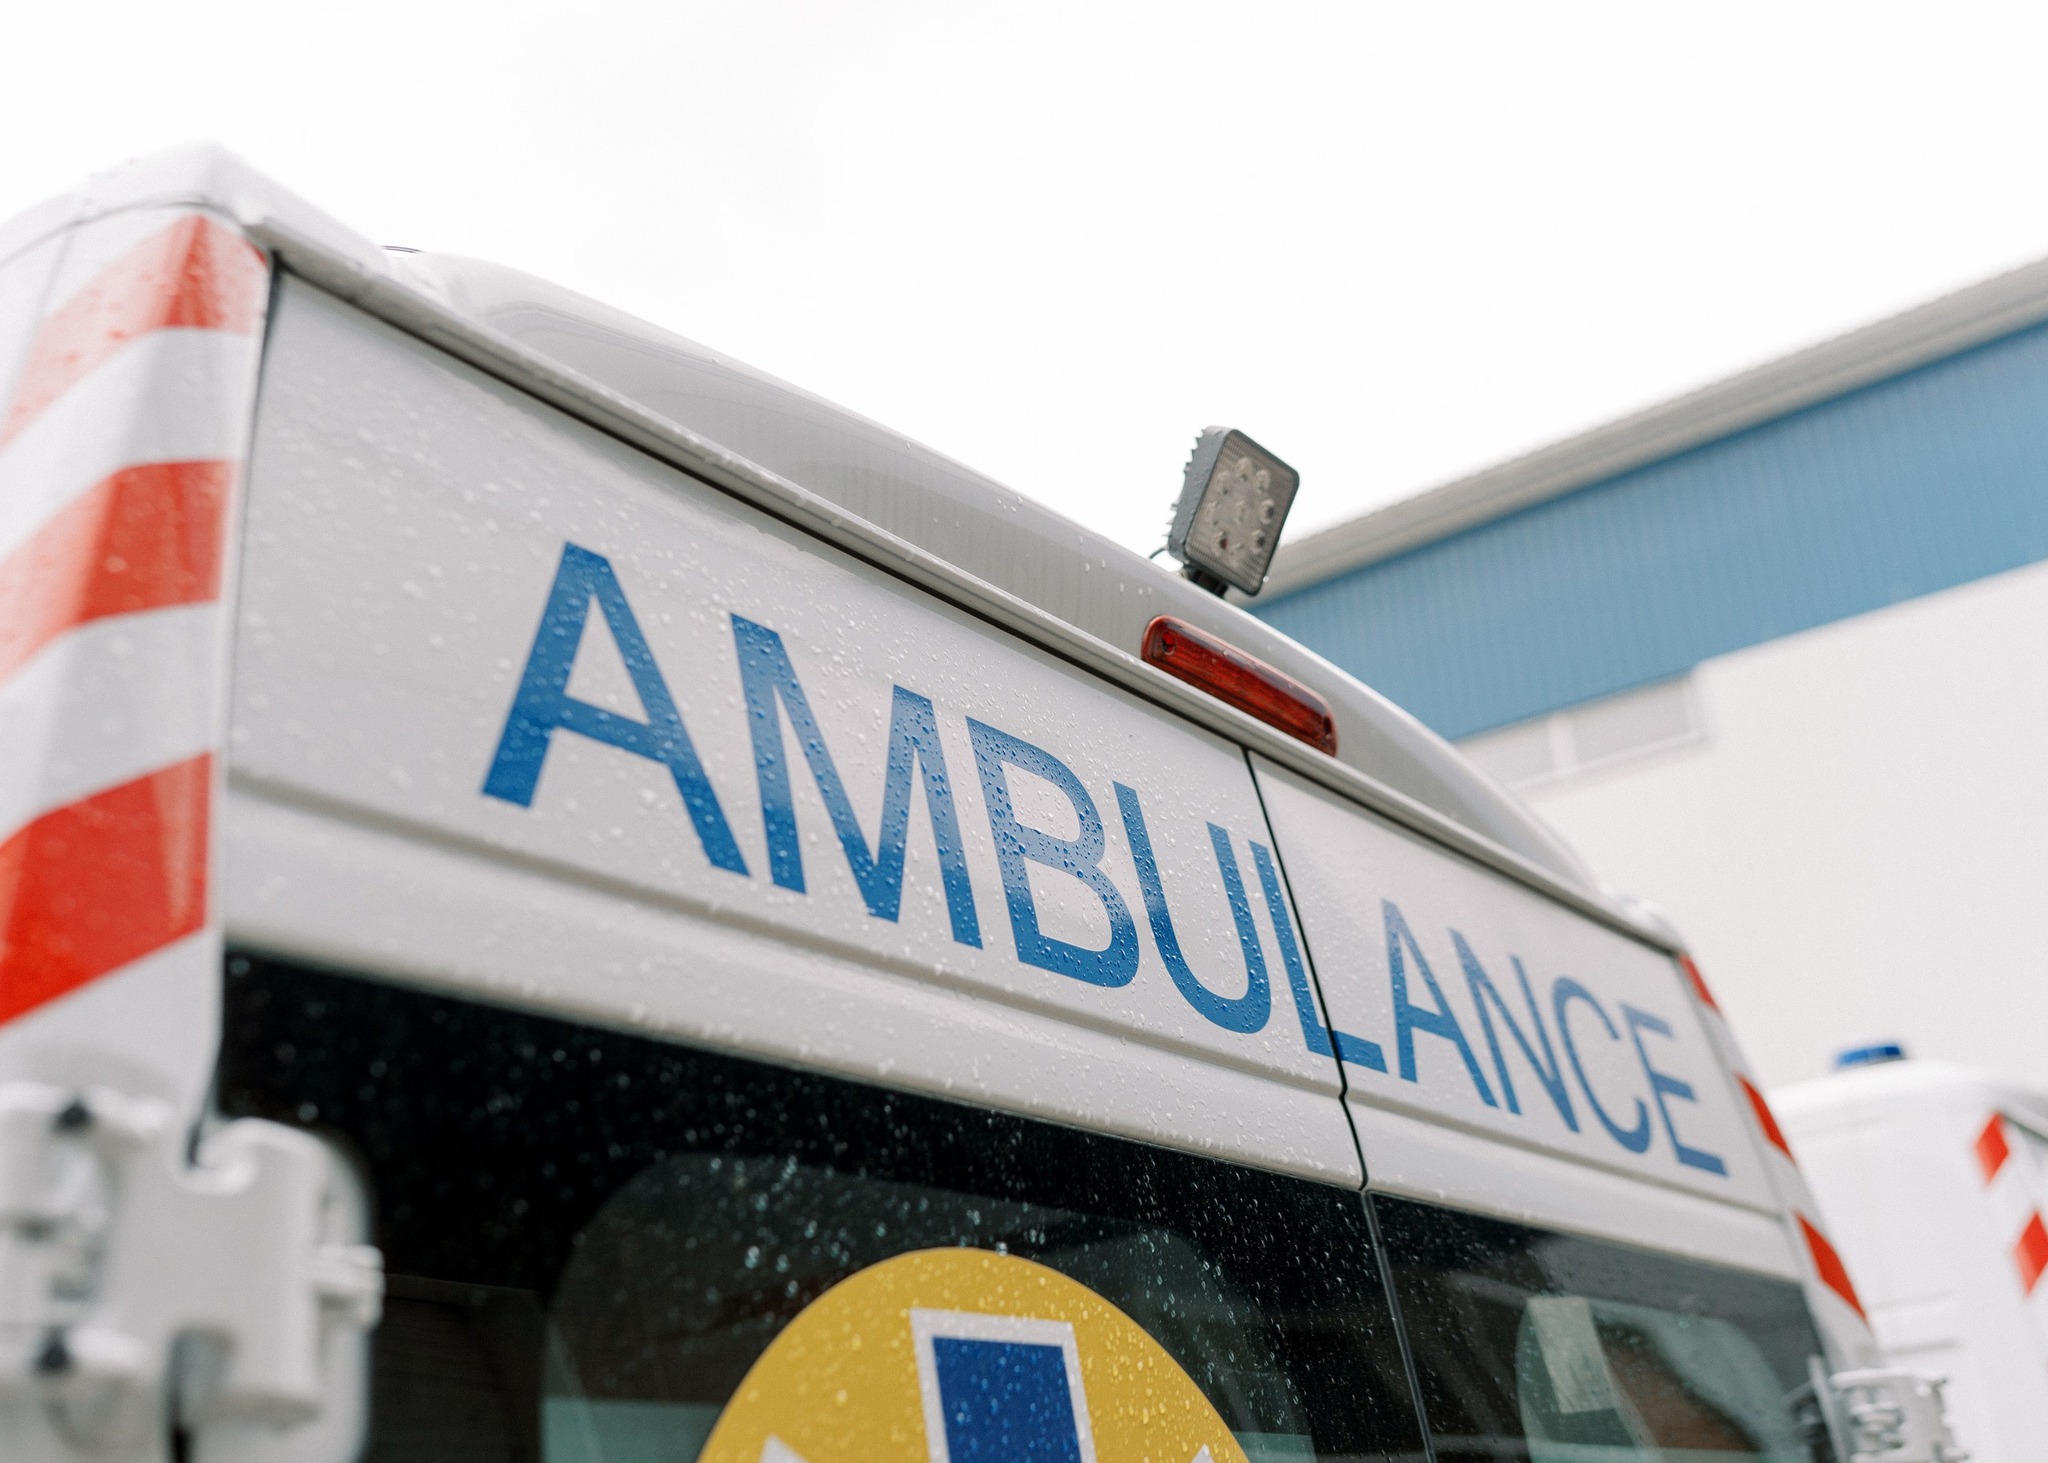 Thirteen ambulances purchased under the UNITED24 initiative have been delivered to military and civilian medical facilities